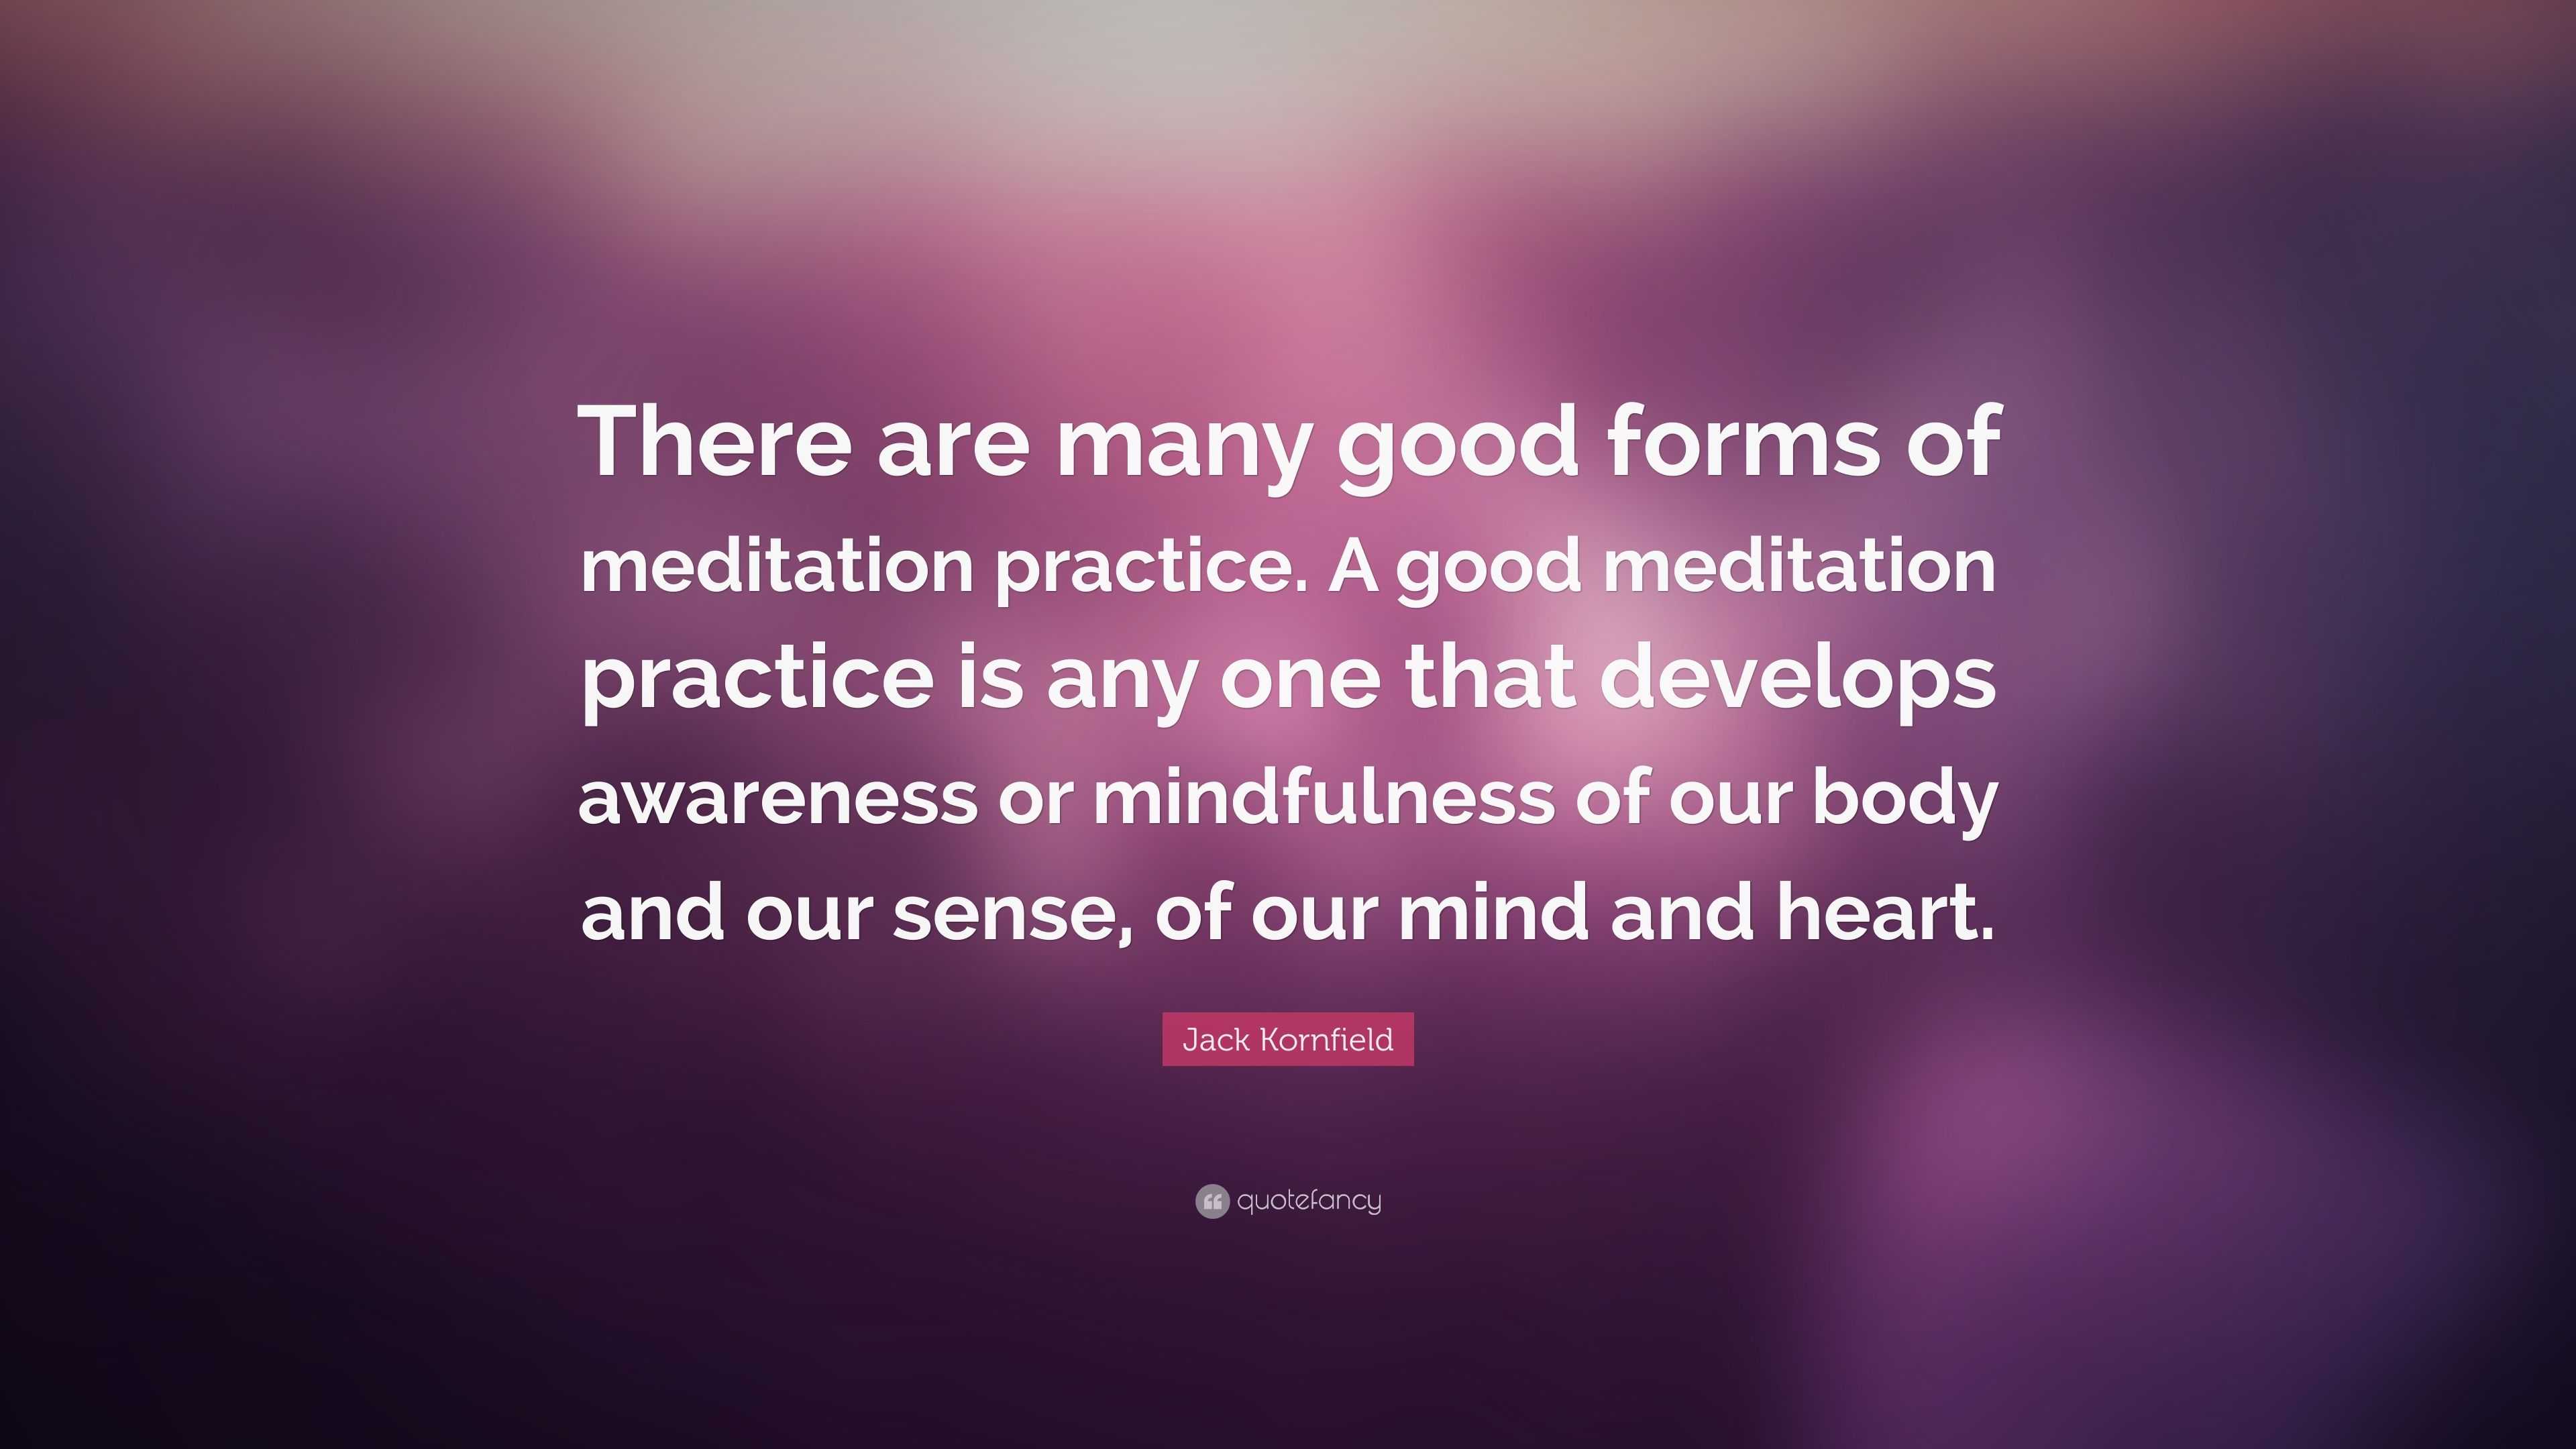 Jack Kornfield Quote: “There are many good forms of meditation practice ...